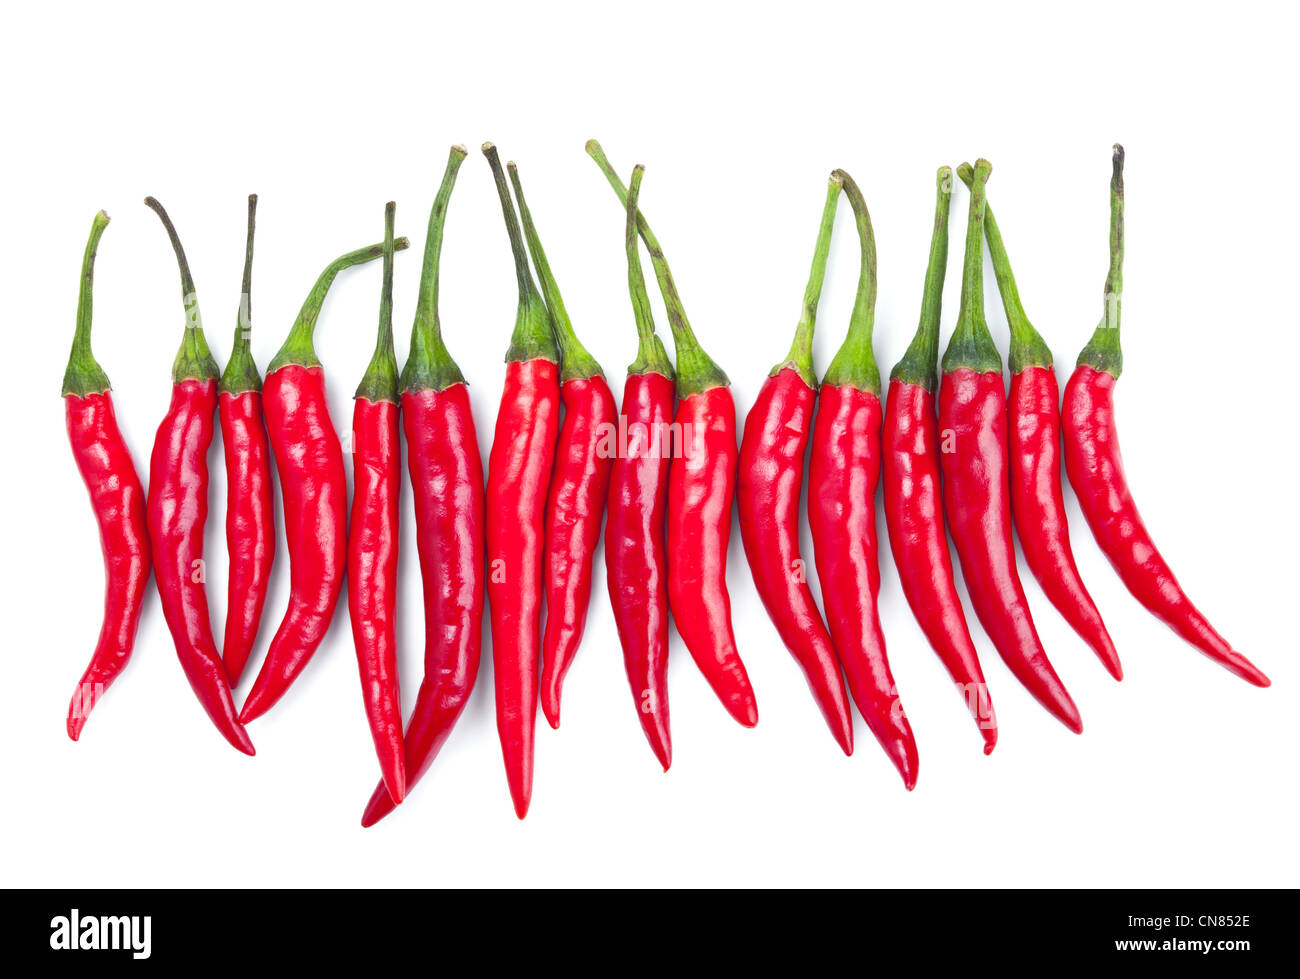 Red chili peppers isolated on white background Stock Photo